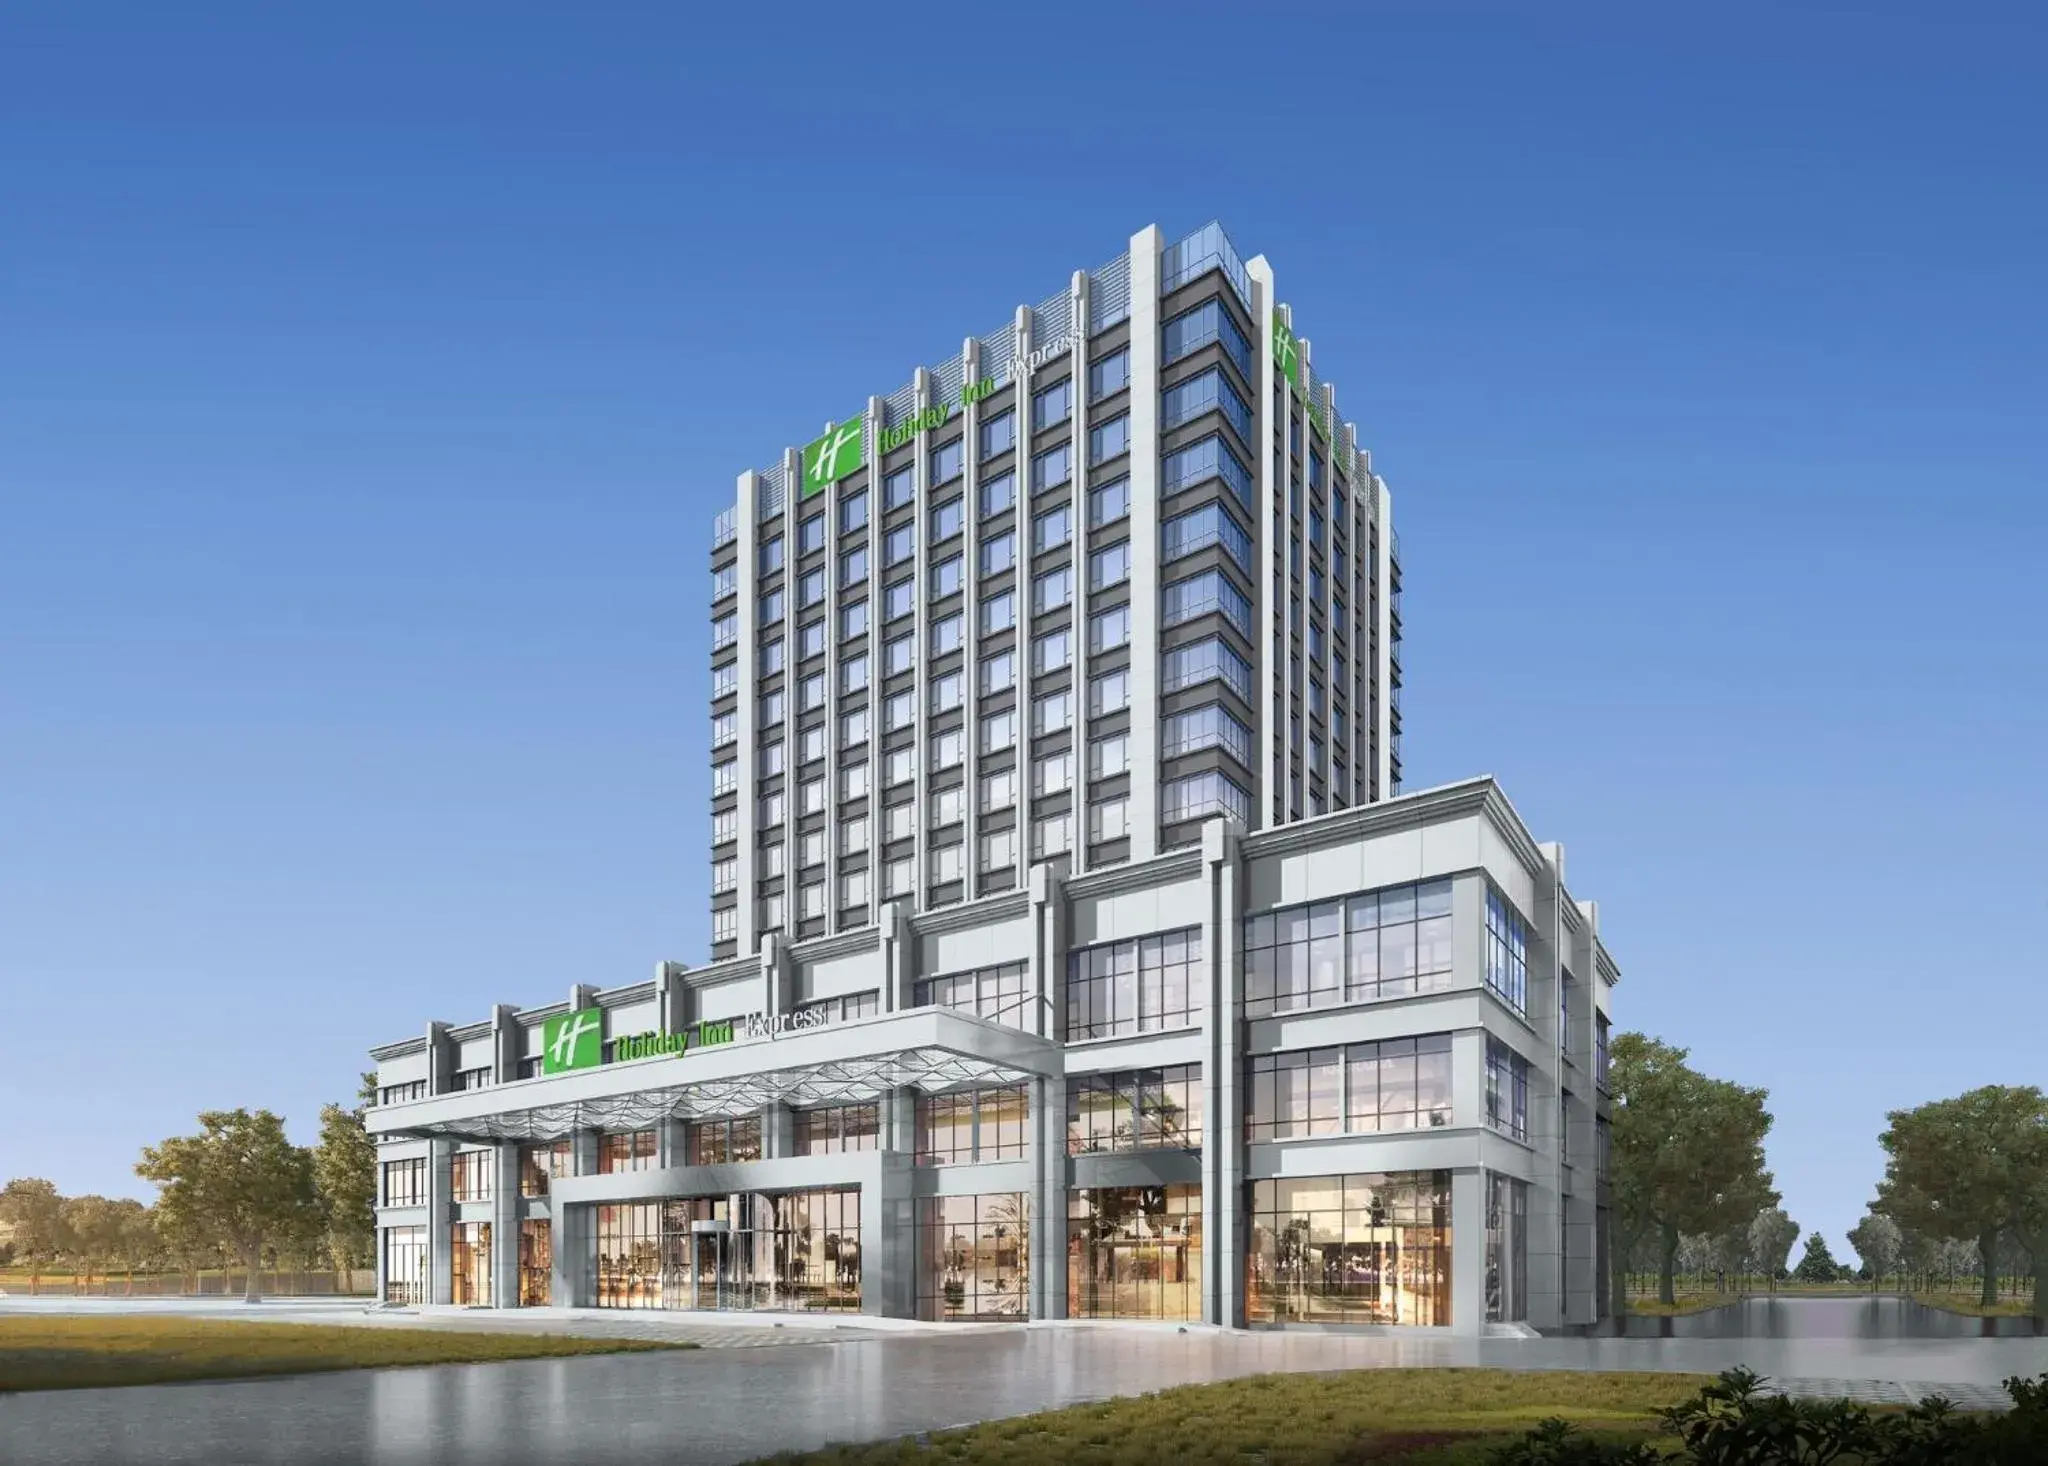 Property Building in Holiday Inn Express Lanzhou New Area, an IHG Hotel